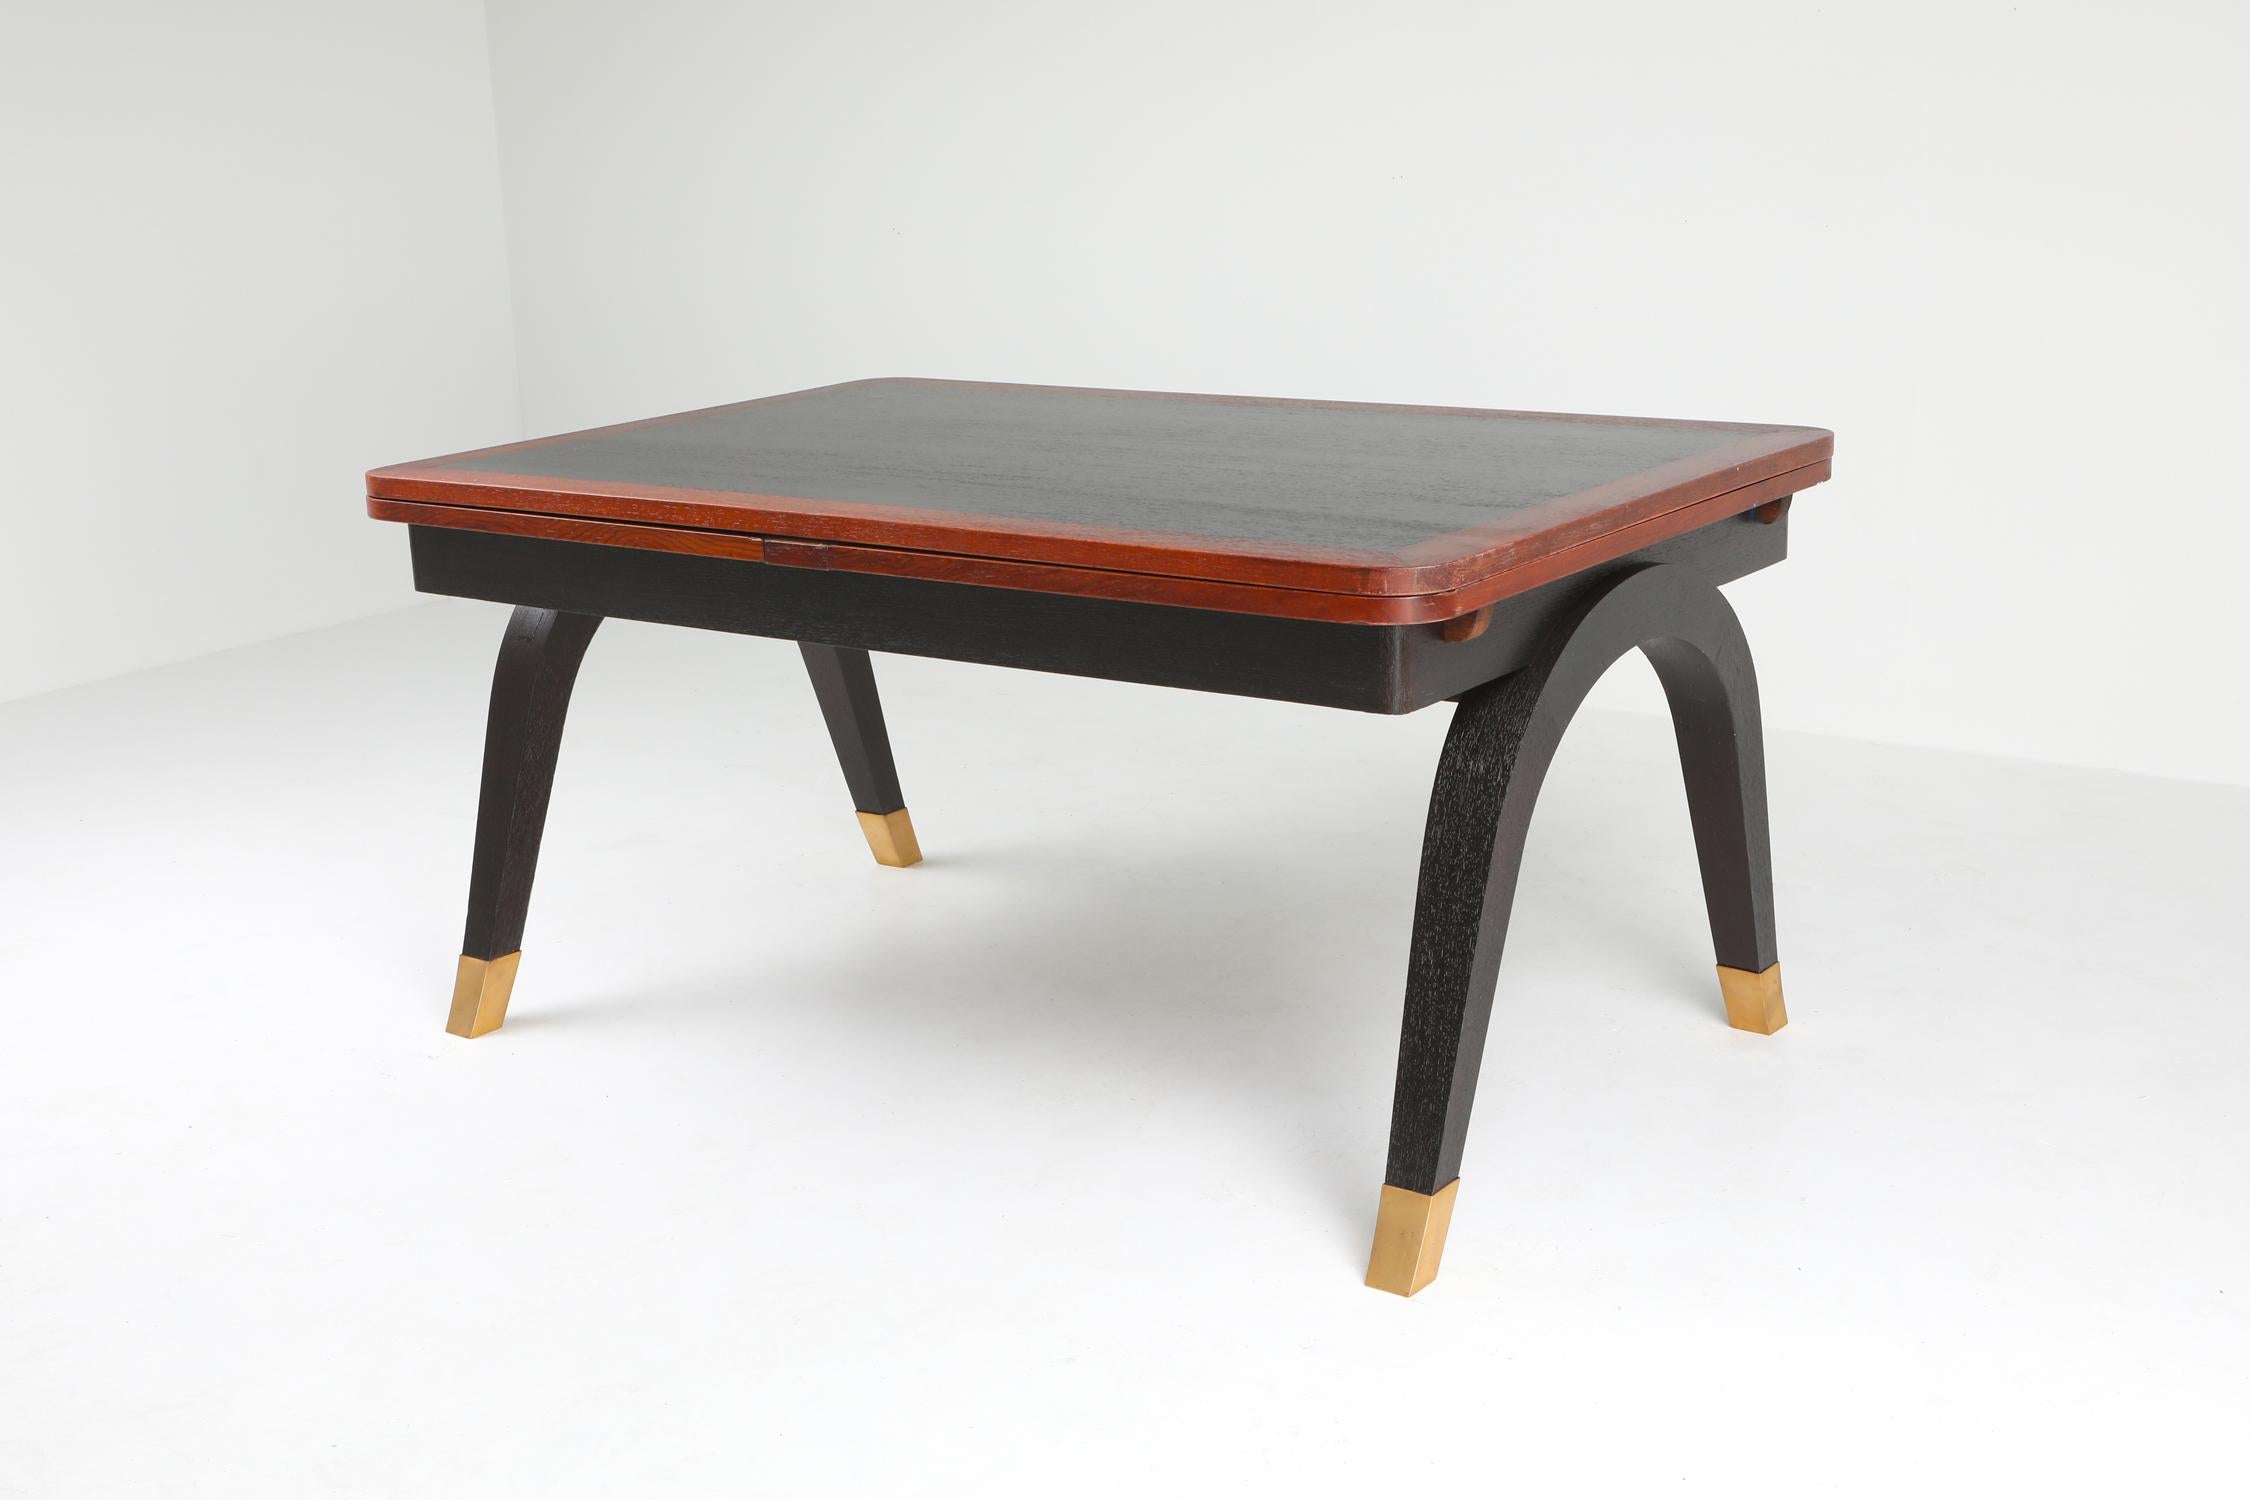 European Art Deco Extendable Dining Table For Sale